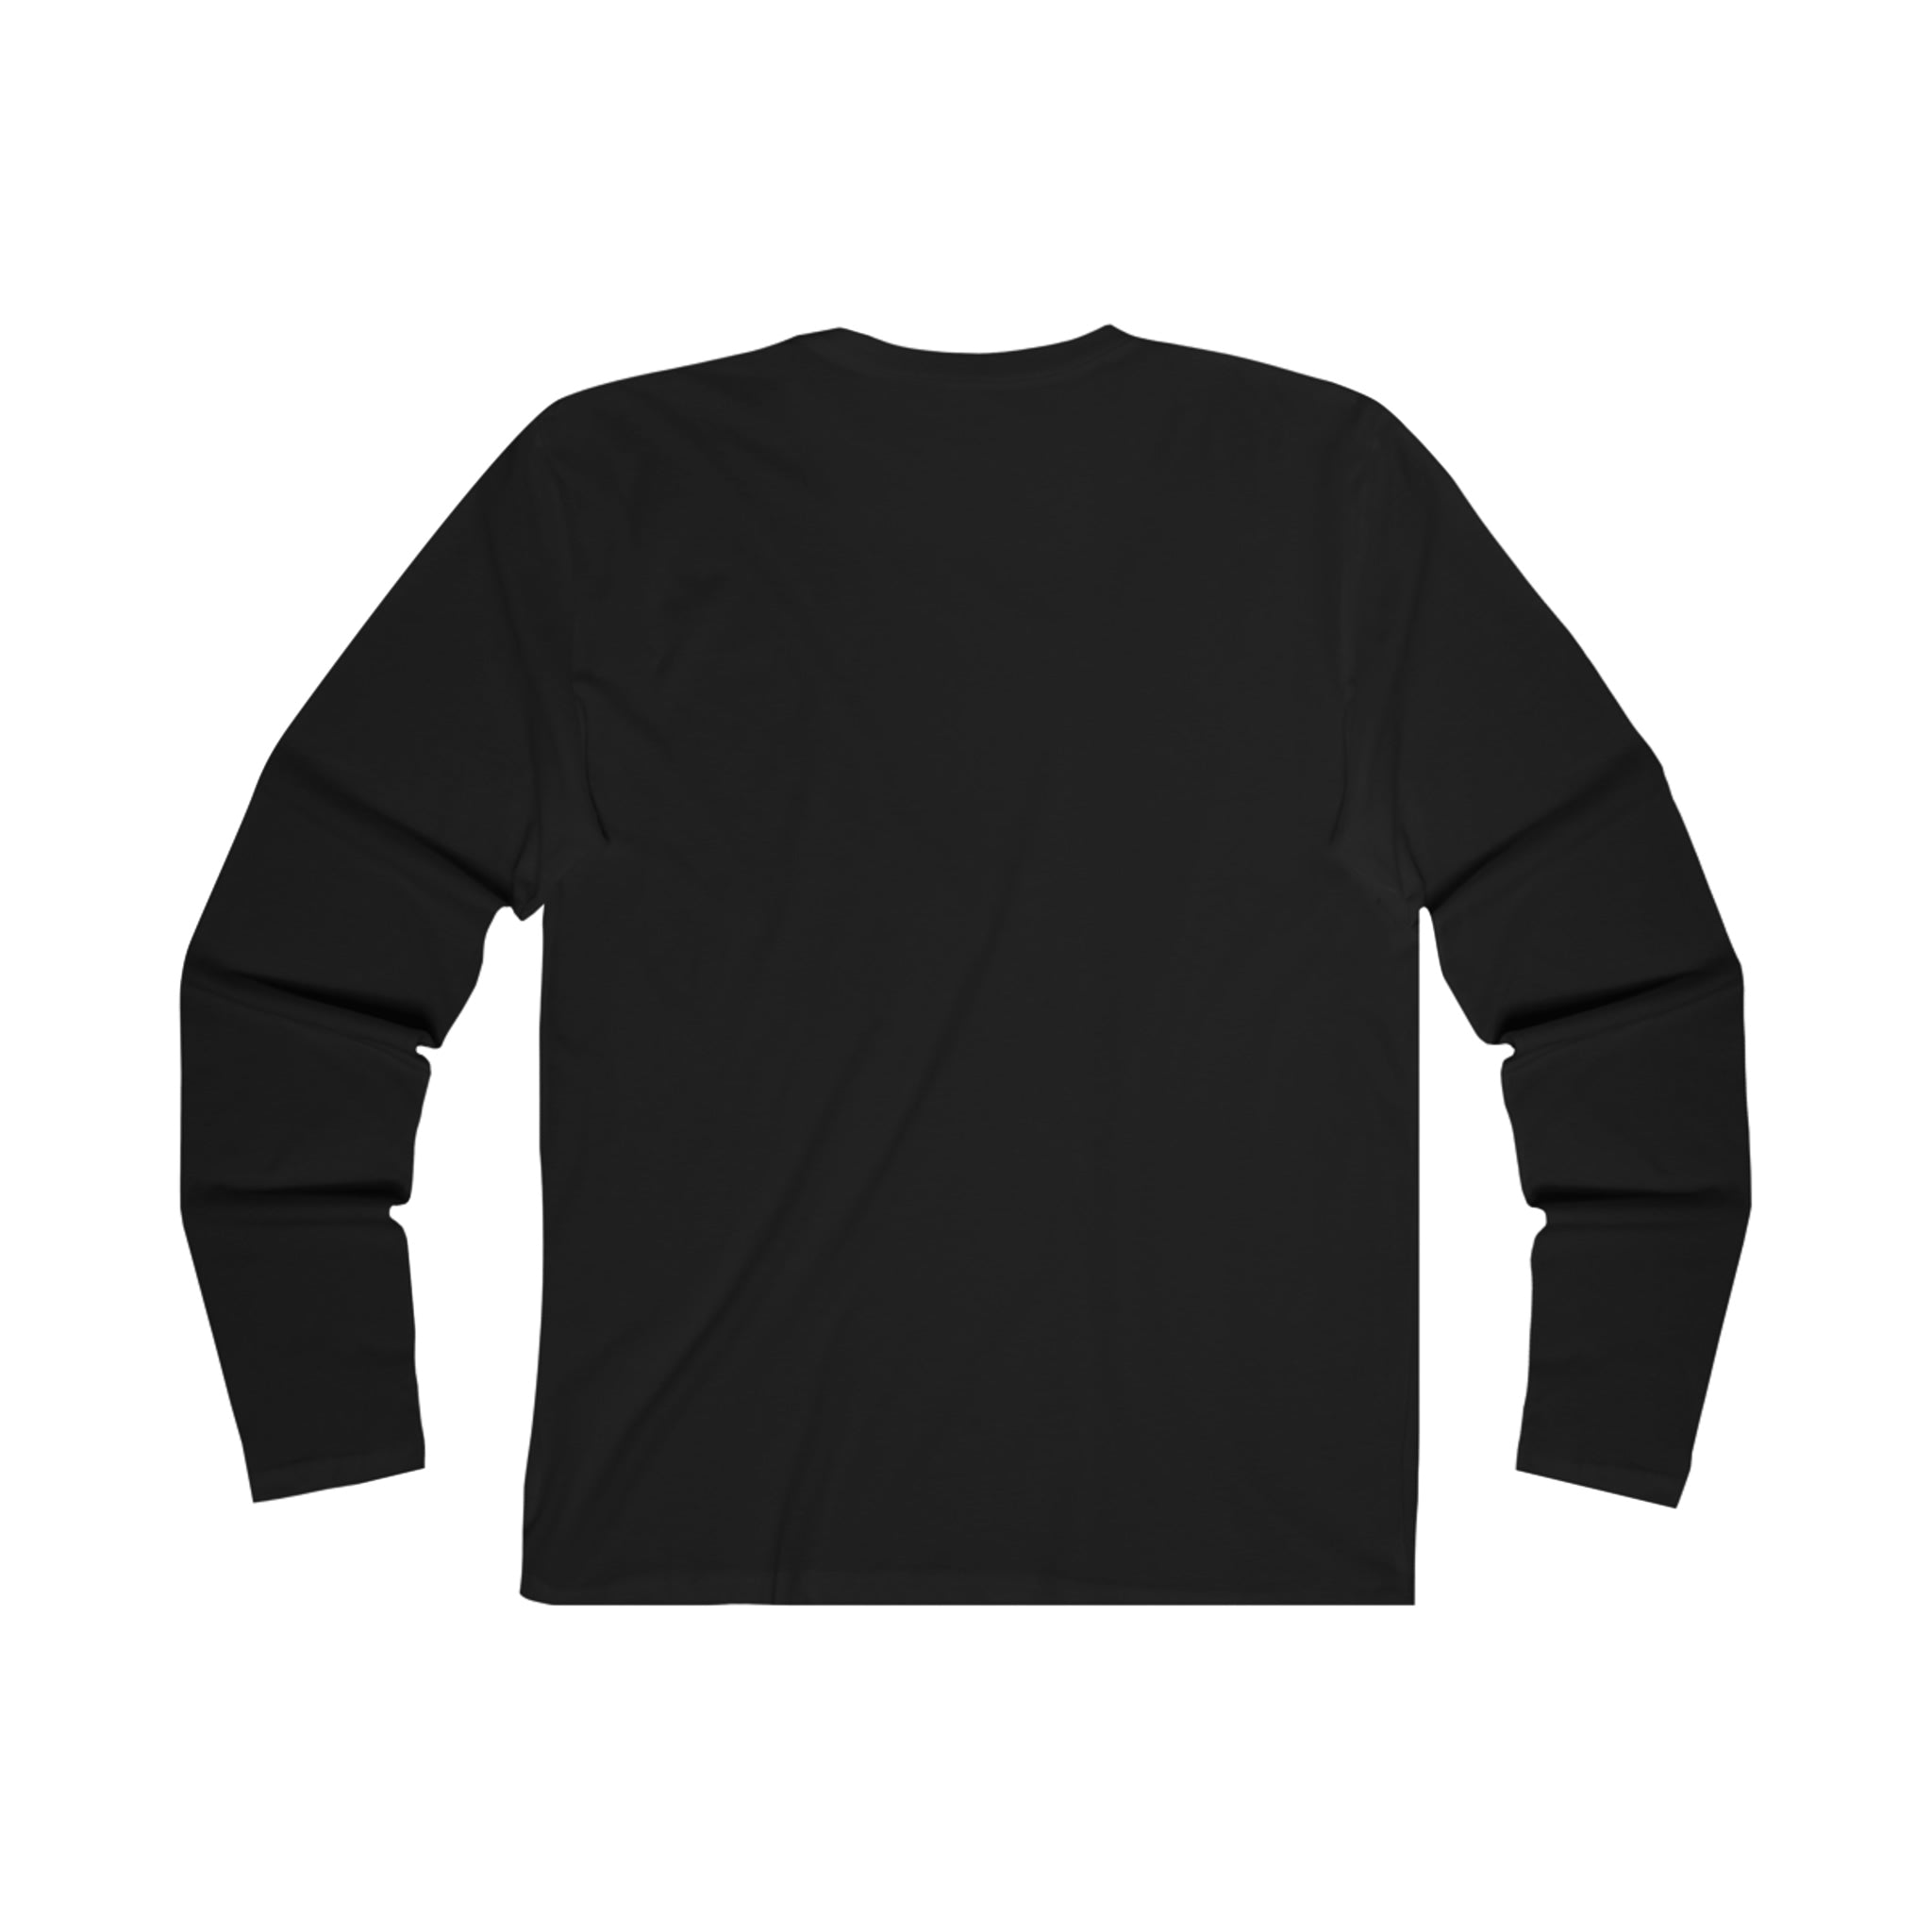 Men's You Are Dust Long Sleeve